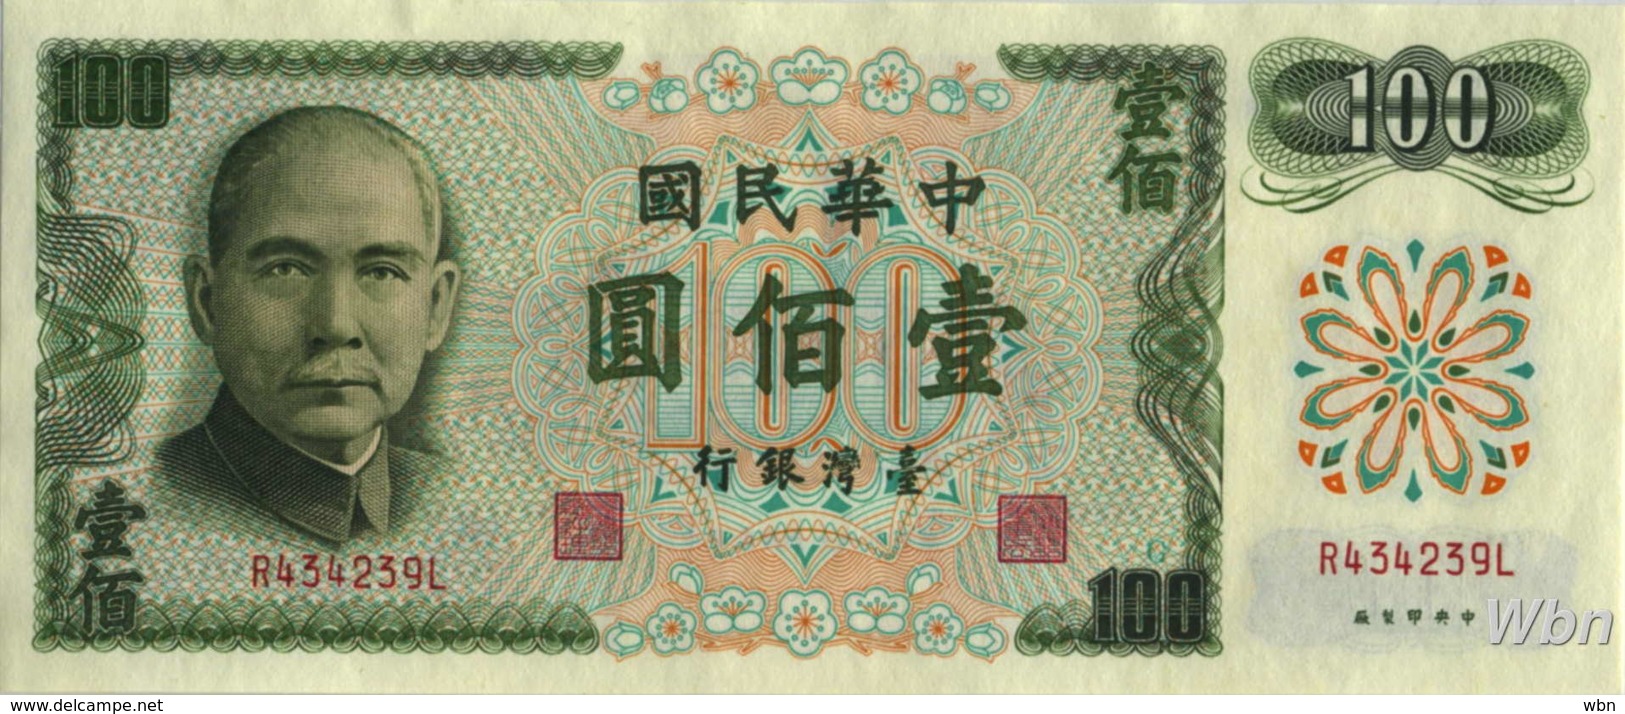 Taiwan 100 NT$ (P1983) Letter G -UNC- - Taiwan